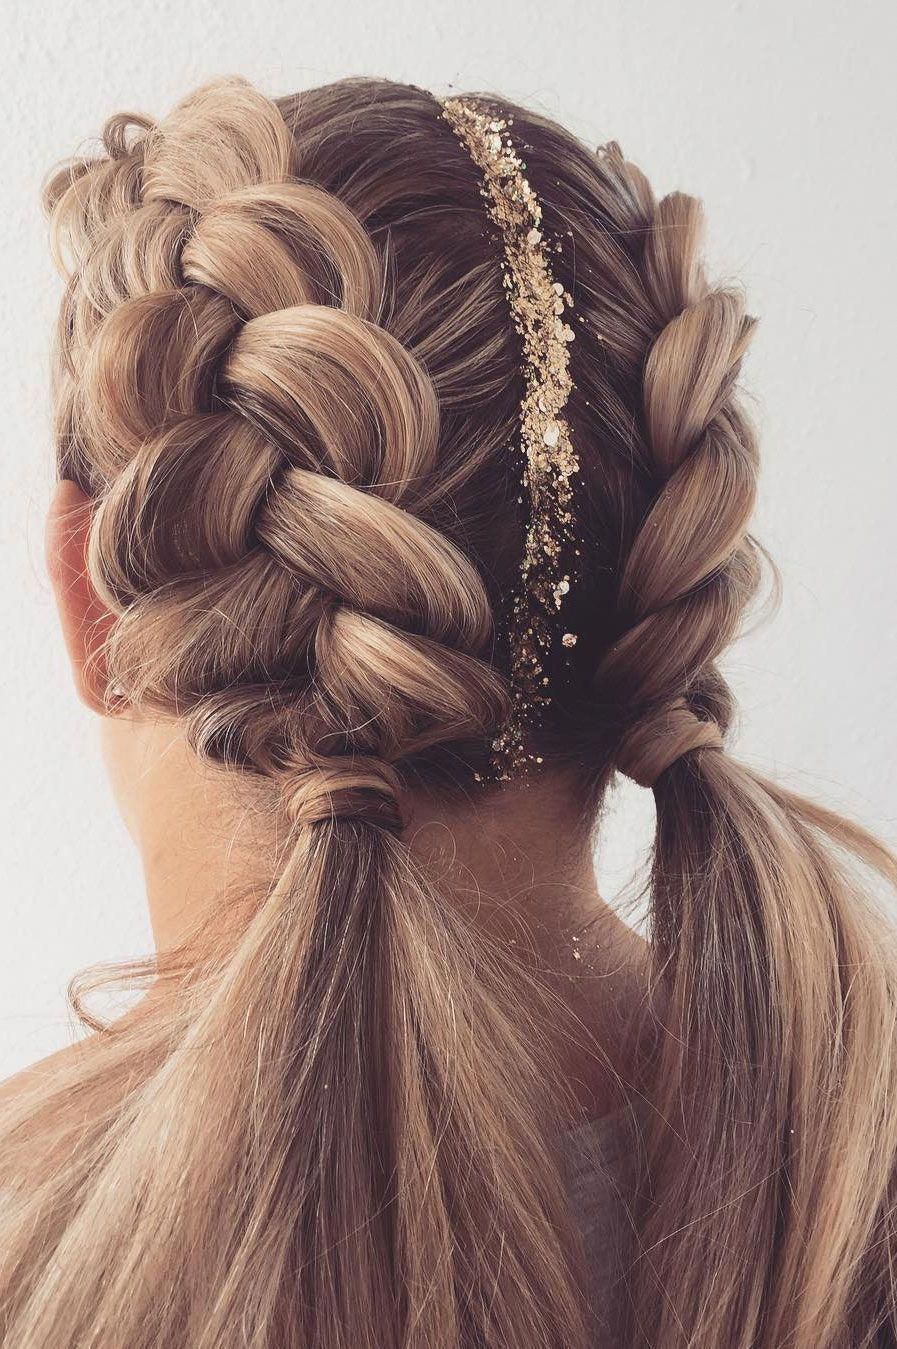 70 Amazing Braid Hairstyles For Party And Holidays